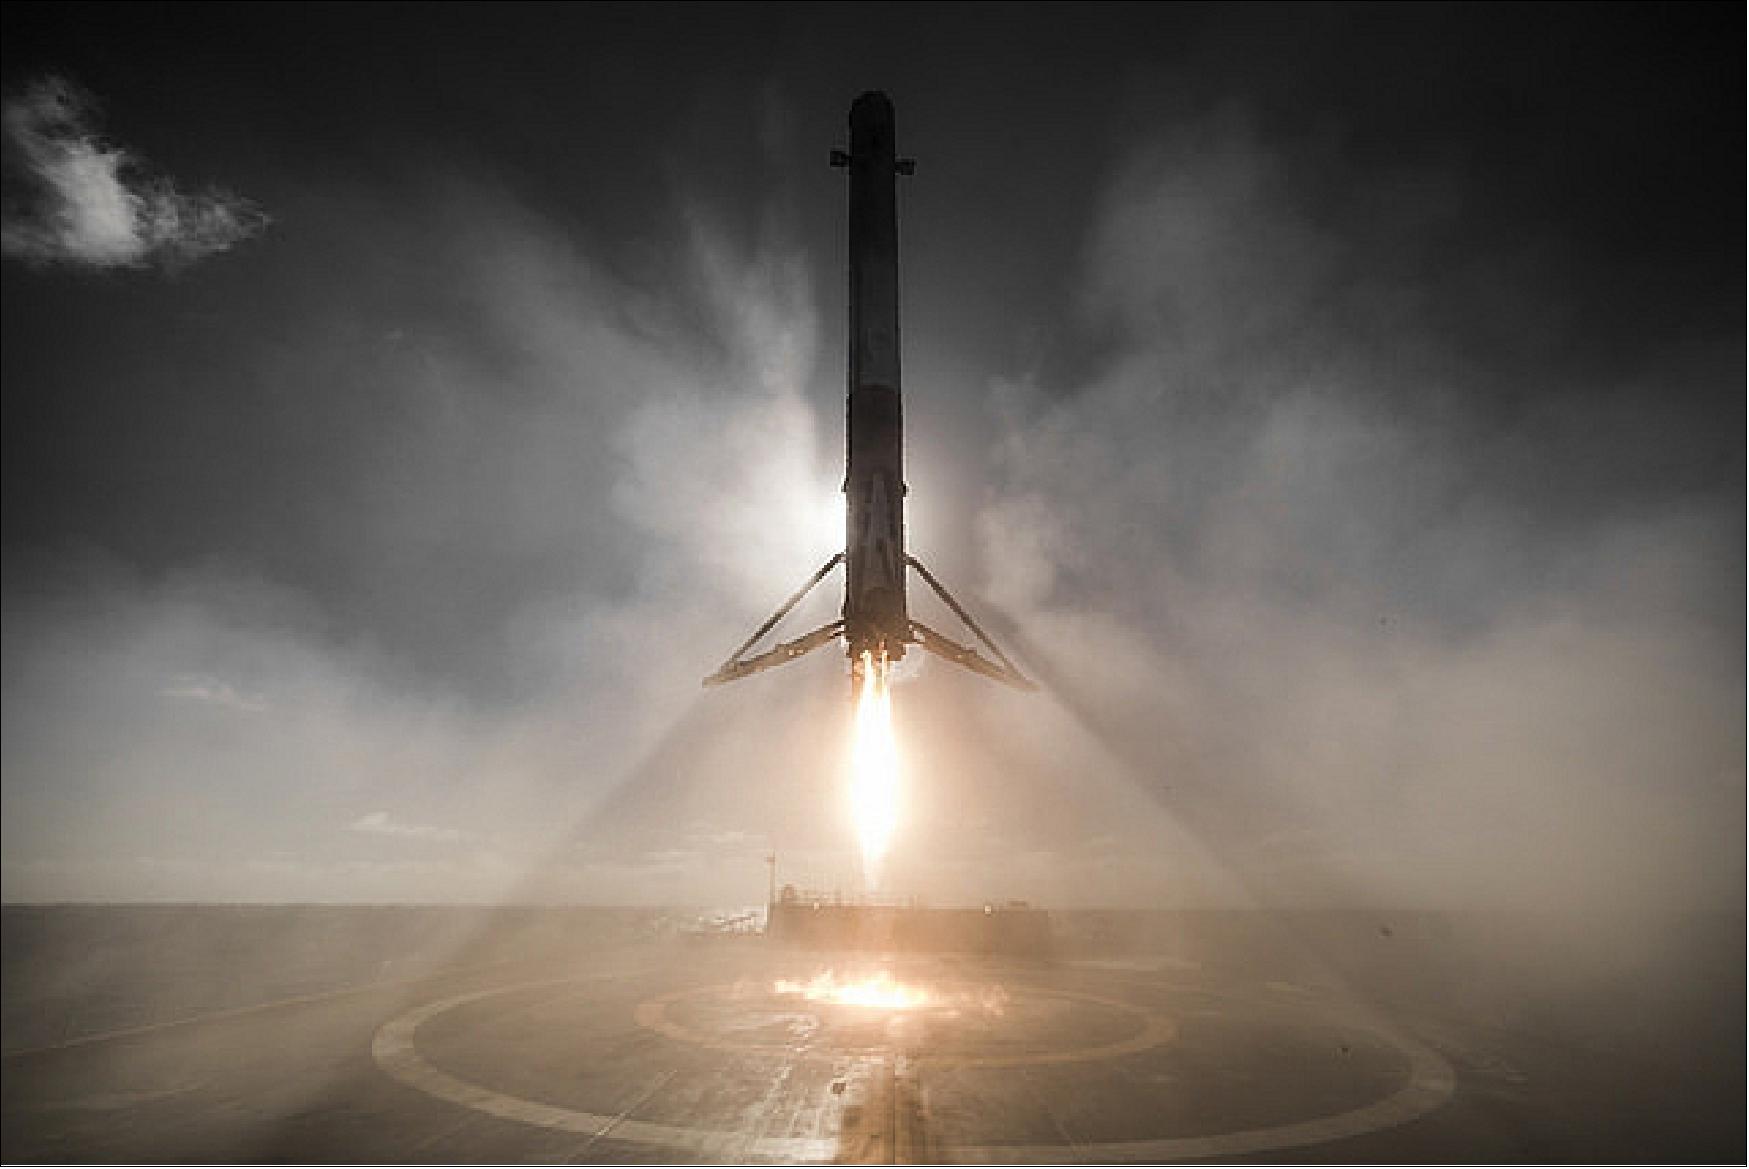 Figure 16: A stunning view of the Falcon-9 rocket just before landing on a barge in the Pacific Ocean, on January 14, 2017 following the launch of 10 Iridium NEXT satellites into orbit (image credit: SpaceX)